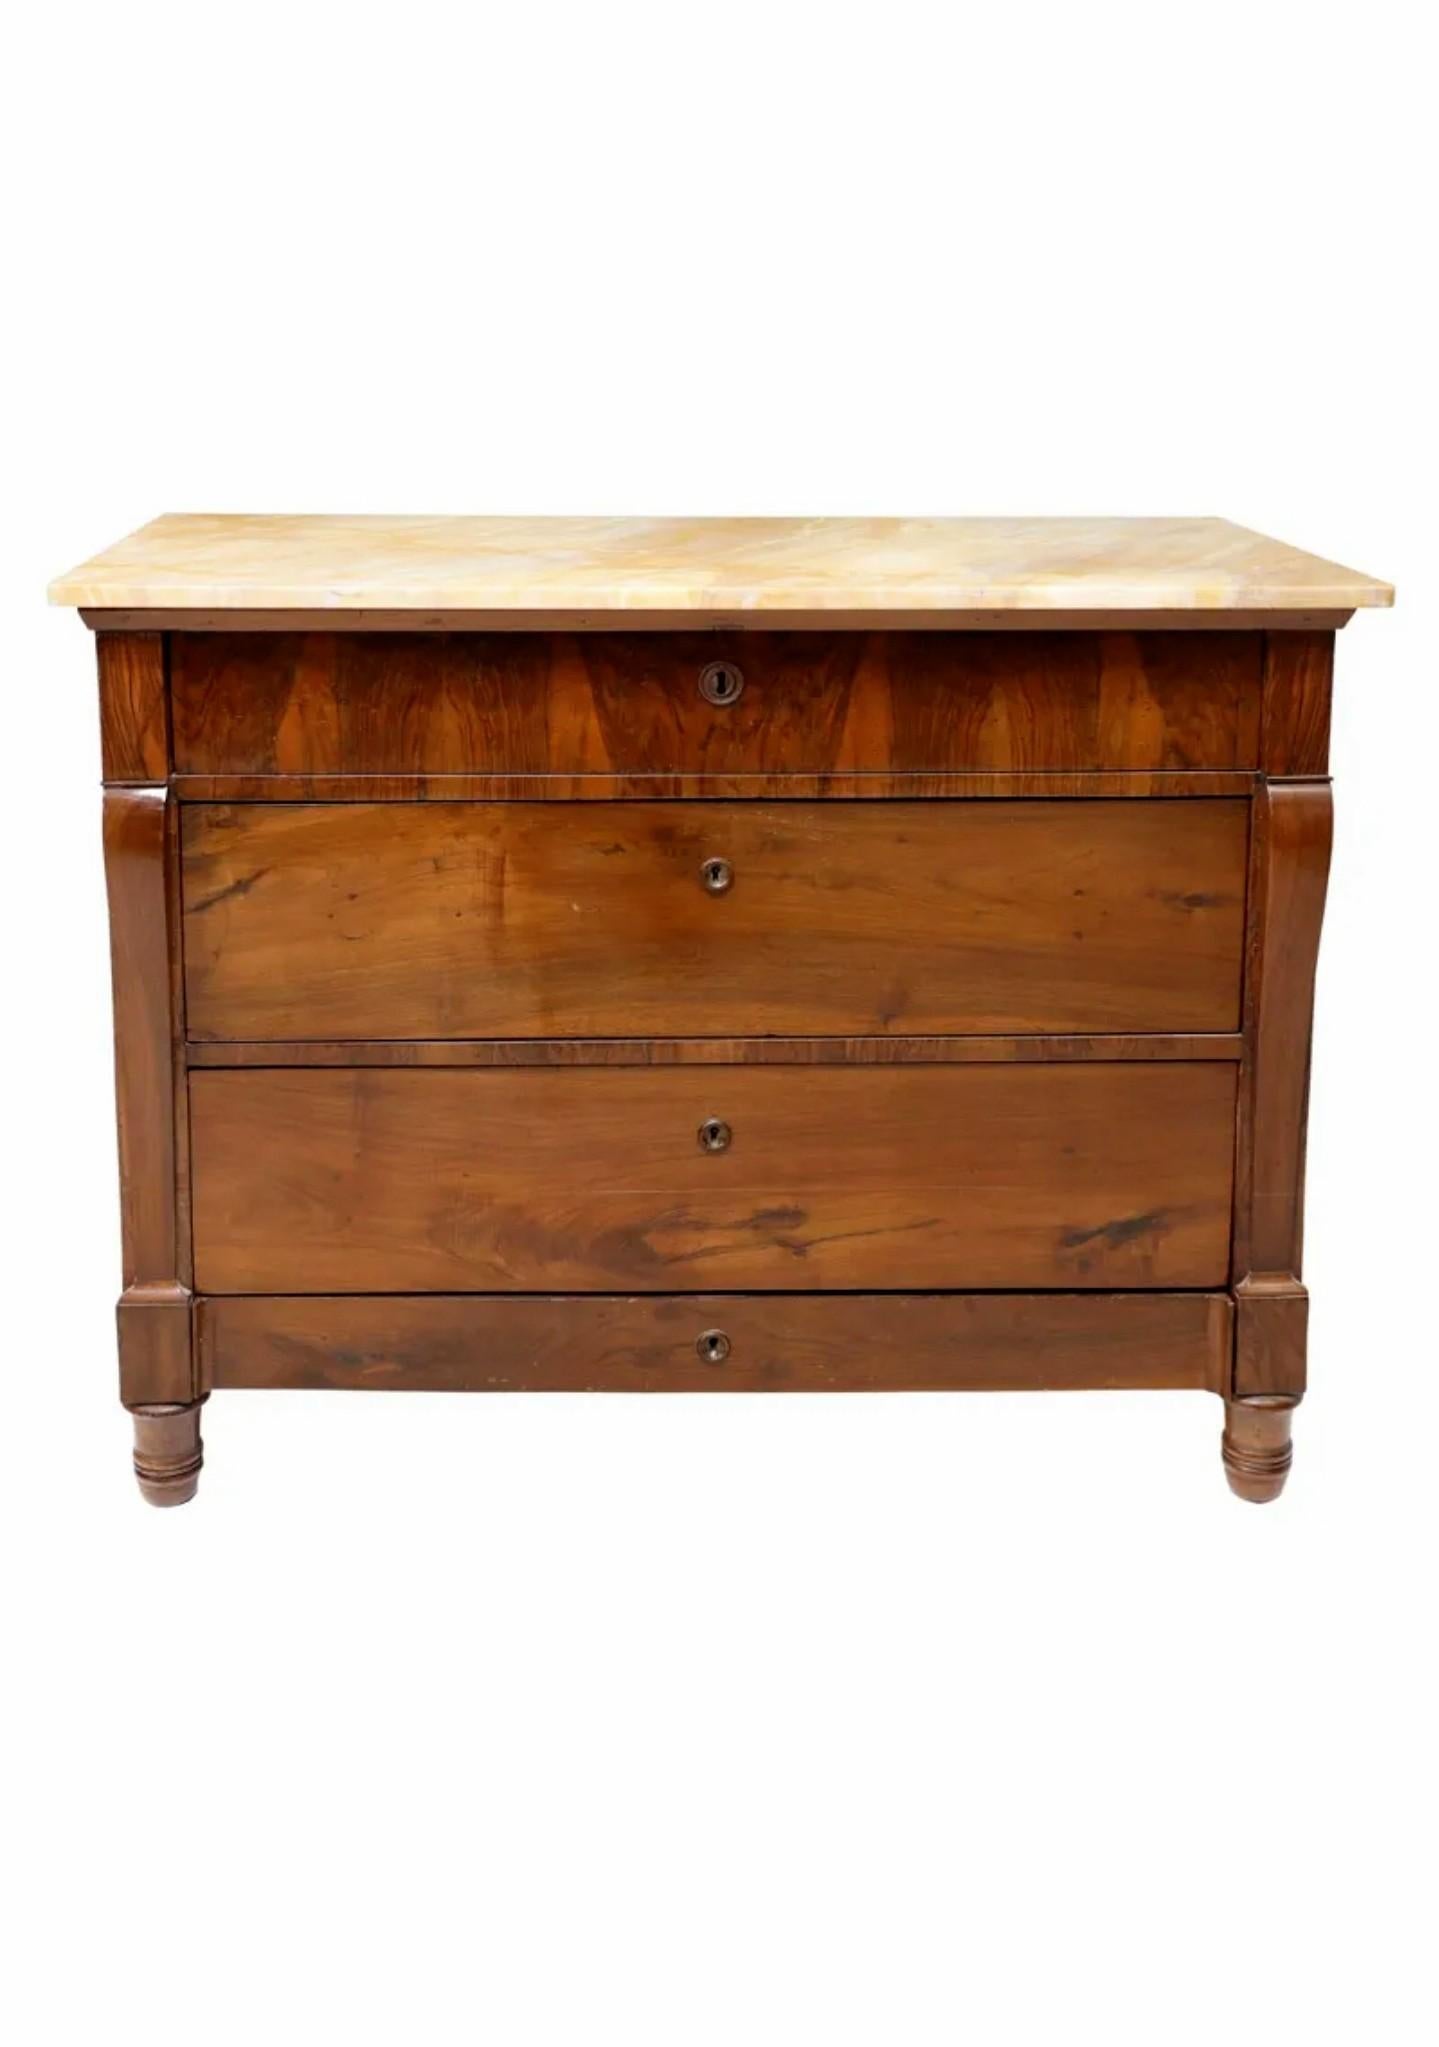 A handsome mid-19th century Italian walnut chest of drawers commode with beautifully aged warm patina. 

Hand-crafted in Italy, circa 1830s, most likely the Tuscan region of Central Italy, Empire influence from the recently pasted Napoleonic Wars,